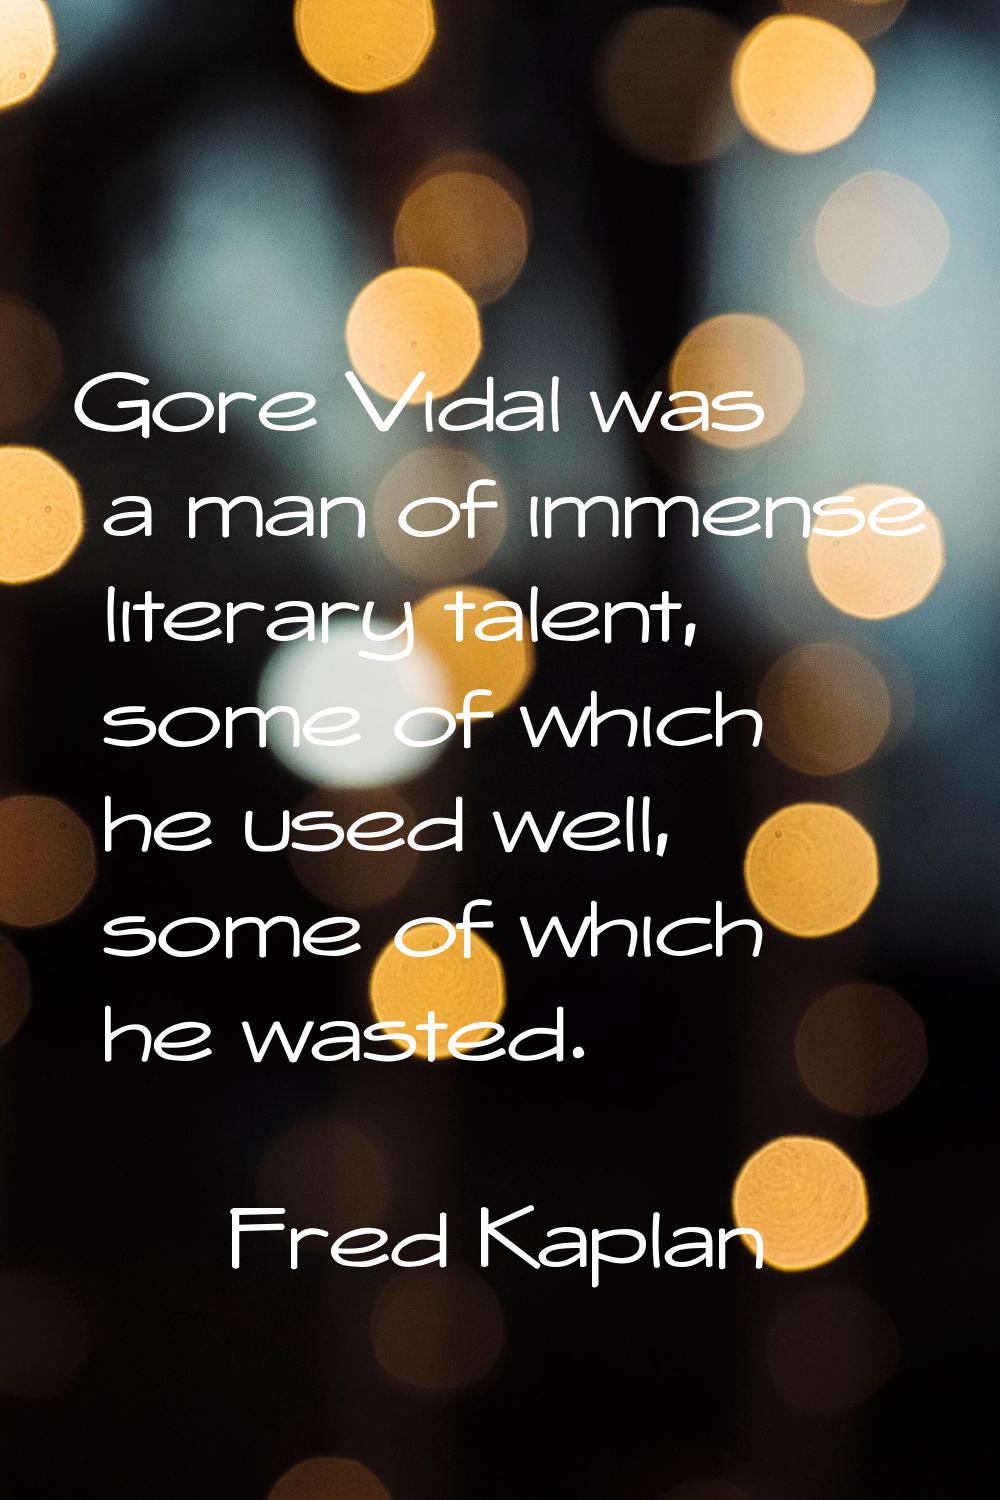 Gore Vidal was a man of immense literary talent, some of which he used well, some of which he waste